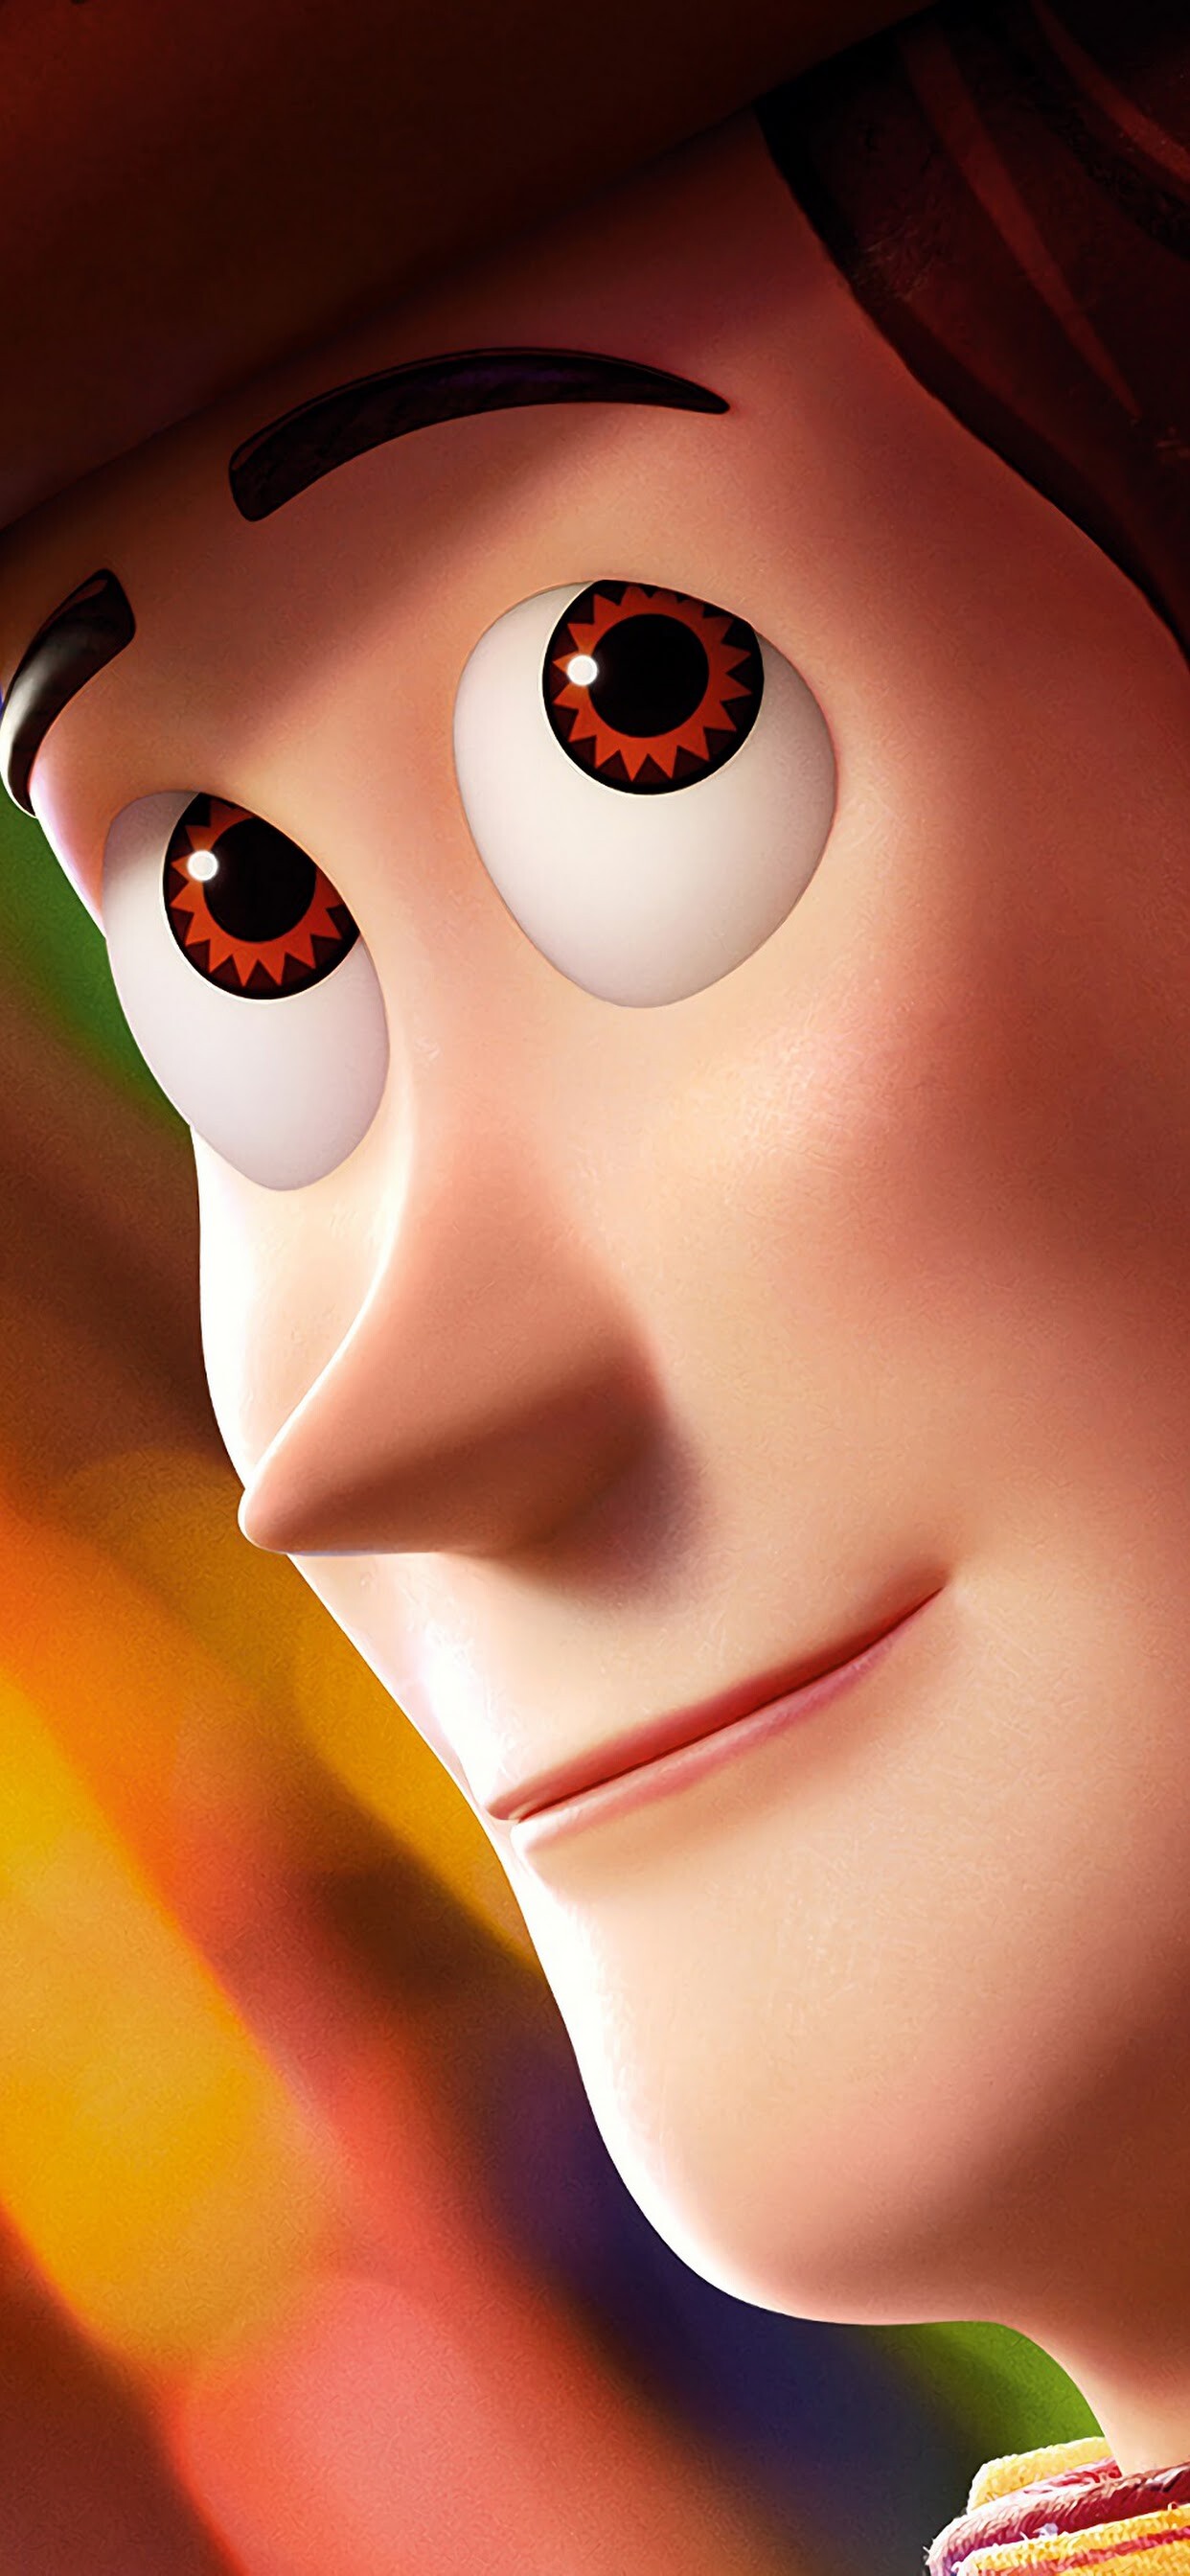 Toy Story: Tom Hanks as Woody, a pullstring cowboy doll who is Andy's favorite toy. 1250x2690 HD Wallpaper.